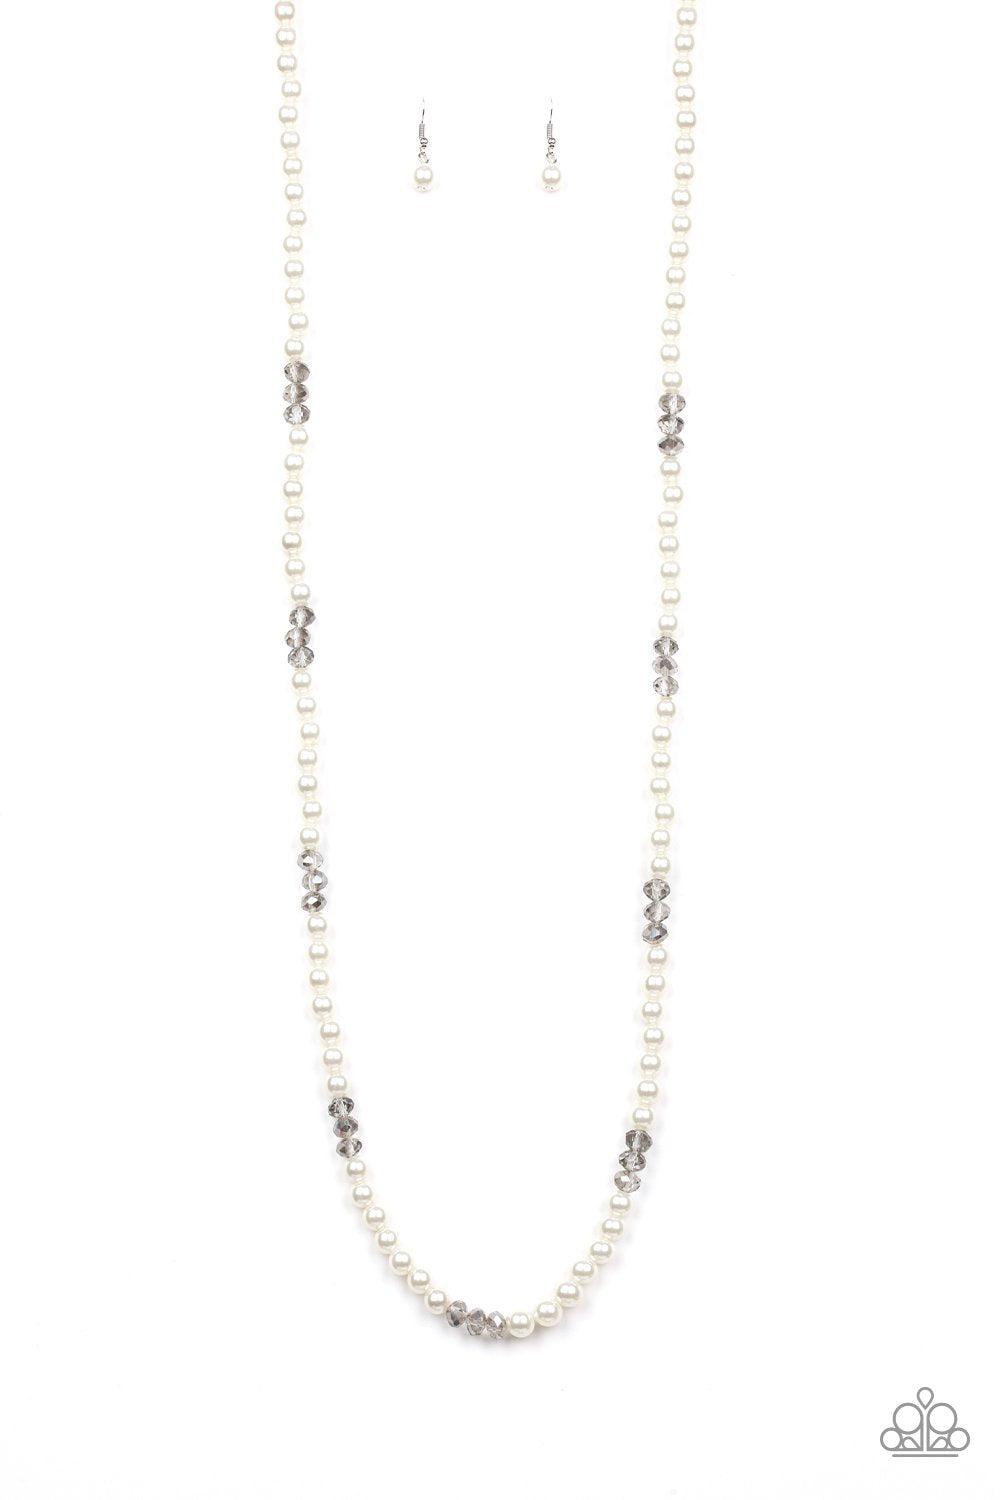 Girls Have More FUNDS White Pearl Necklace - Paparazzi Accessories - lightbox -CarasShop.com - $5 Jewelry by Cara Jewels